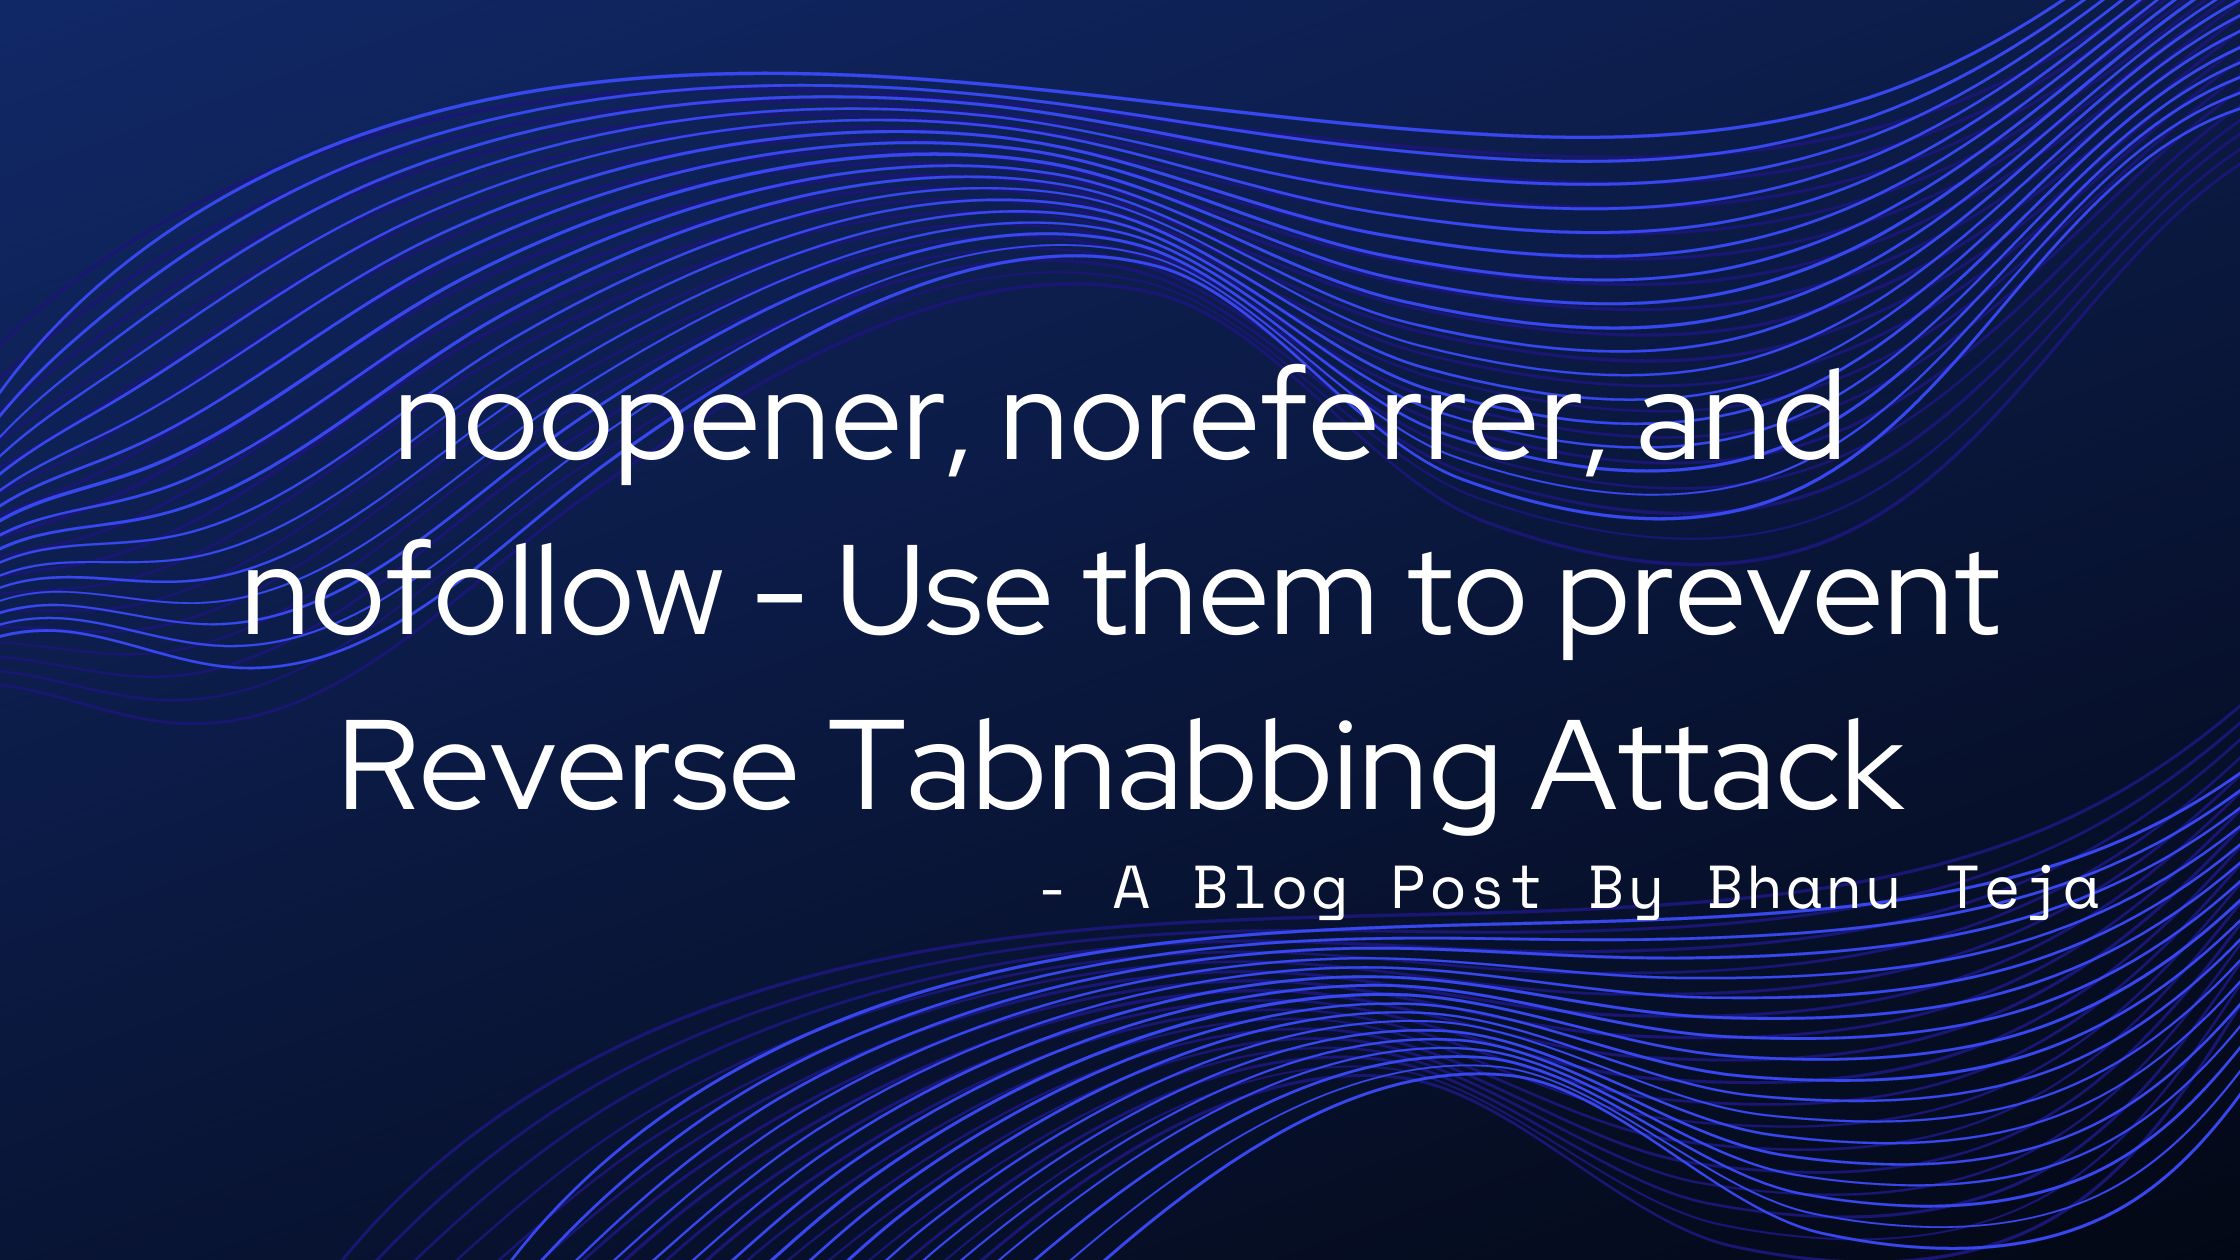 /prevent-reverse-tabnabbing-attacks-with-proper-noopener-noreferrer-and-nofollow-attribution-z14d3zbh feature image